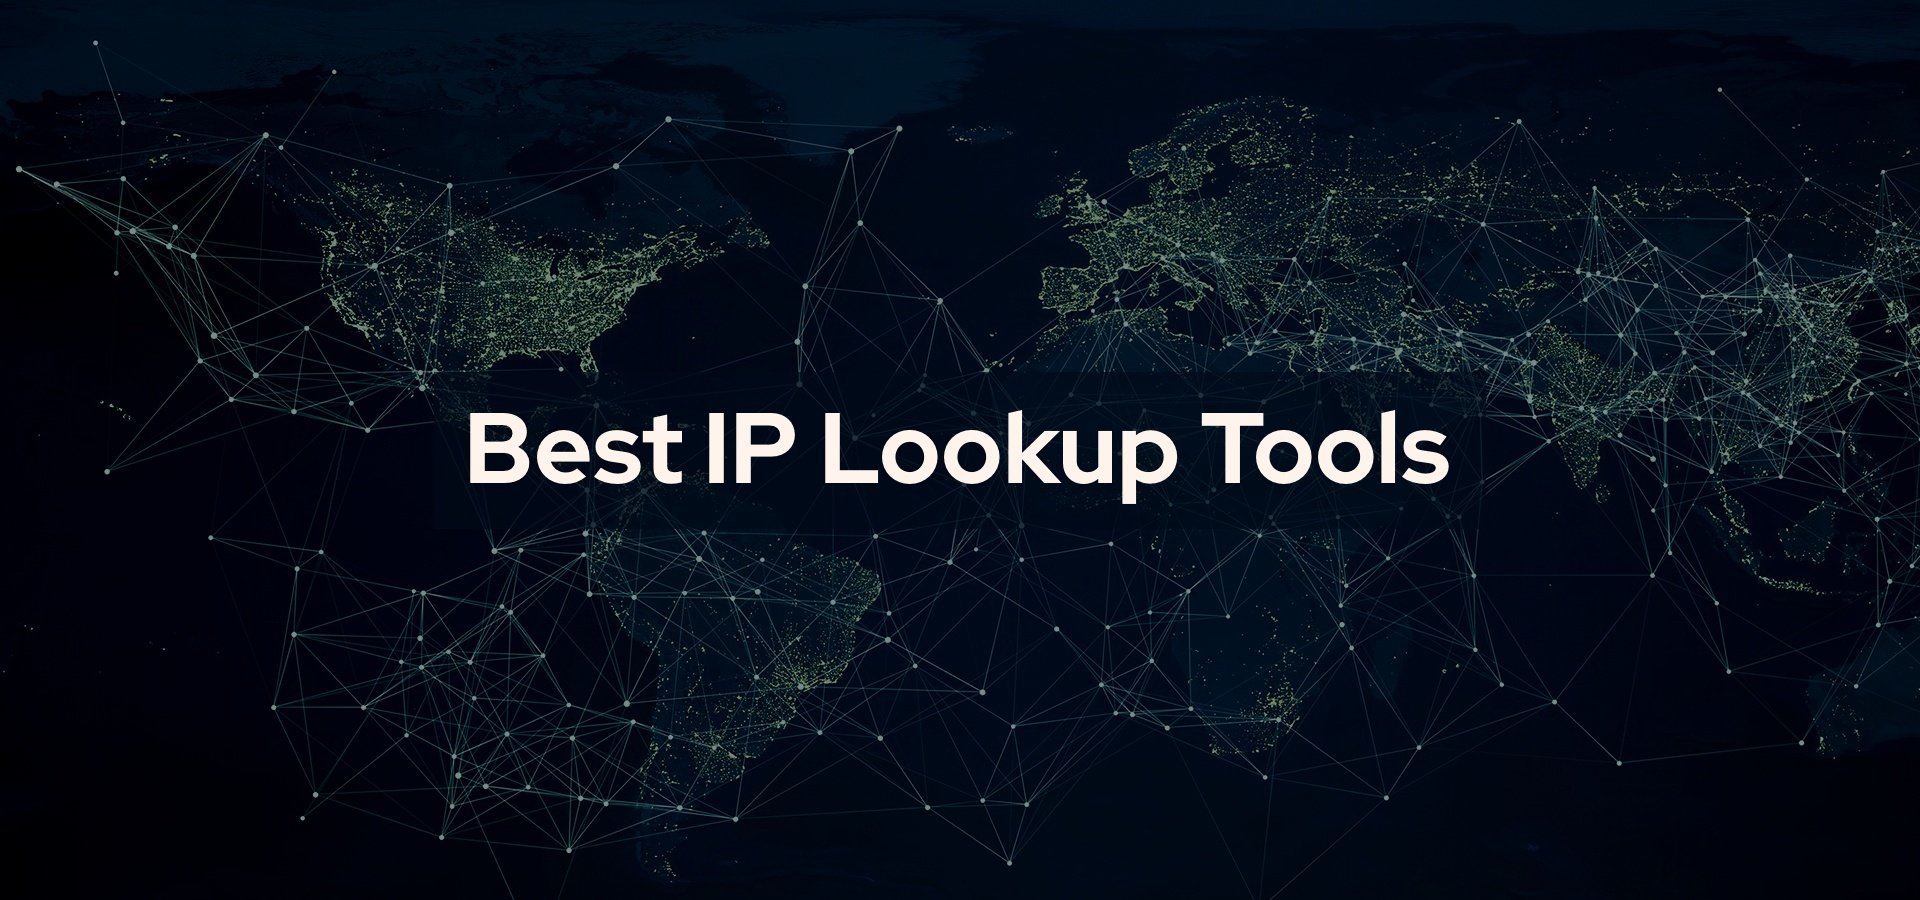 Whois IP: Top 7 tools to perform a WHOIS IP Lookup & RDAP Lookup